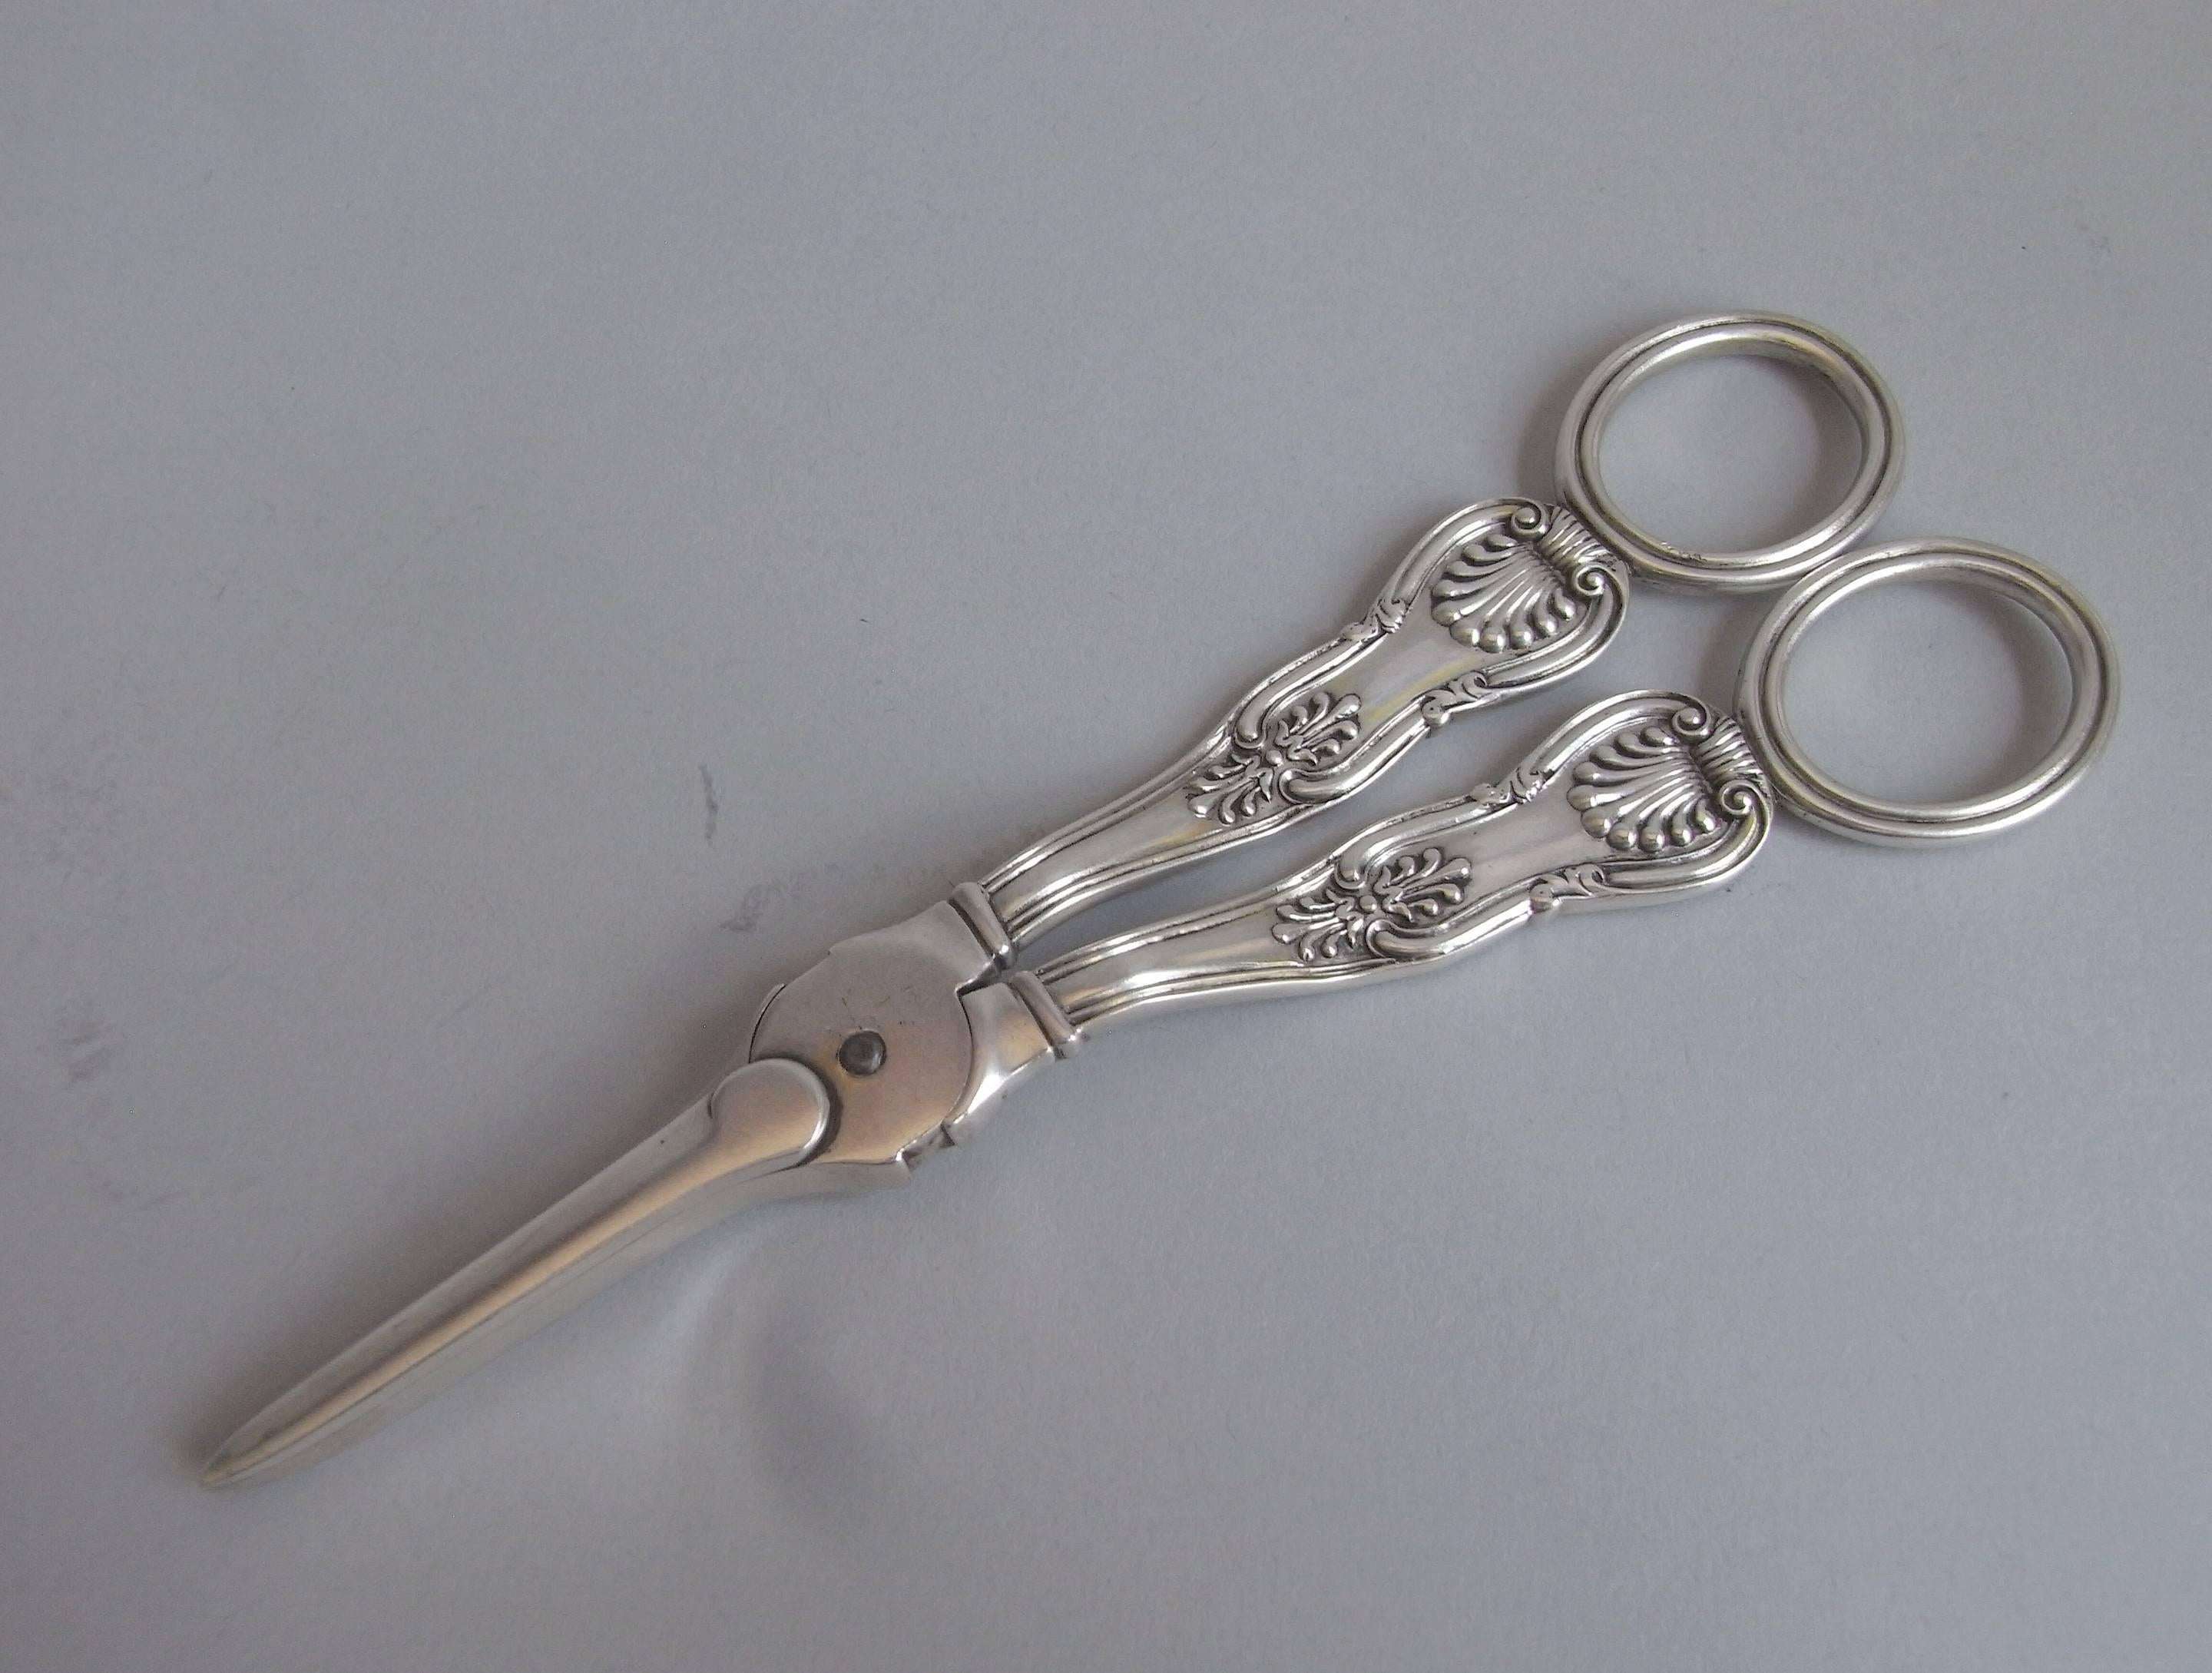 The Grape Shears are of typical form and are modelled in the Kings pattern, which is shown on both the front and the reverse. The oval finger grips are decorated with reeding and one of the arms is engraved with a contemporary crest. The shears are